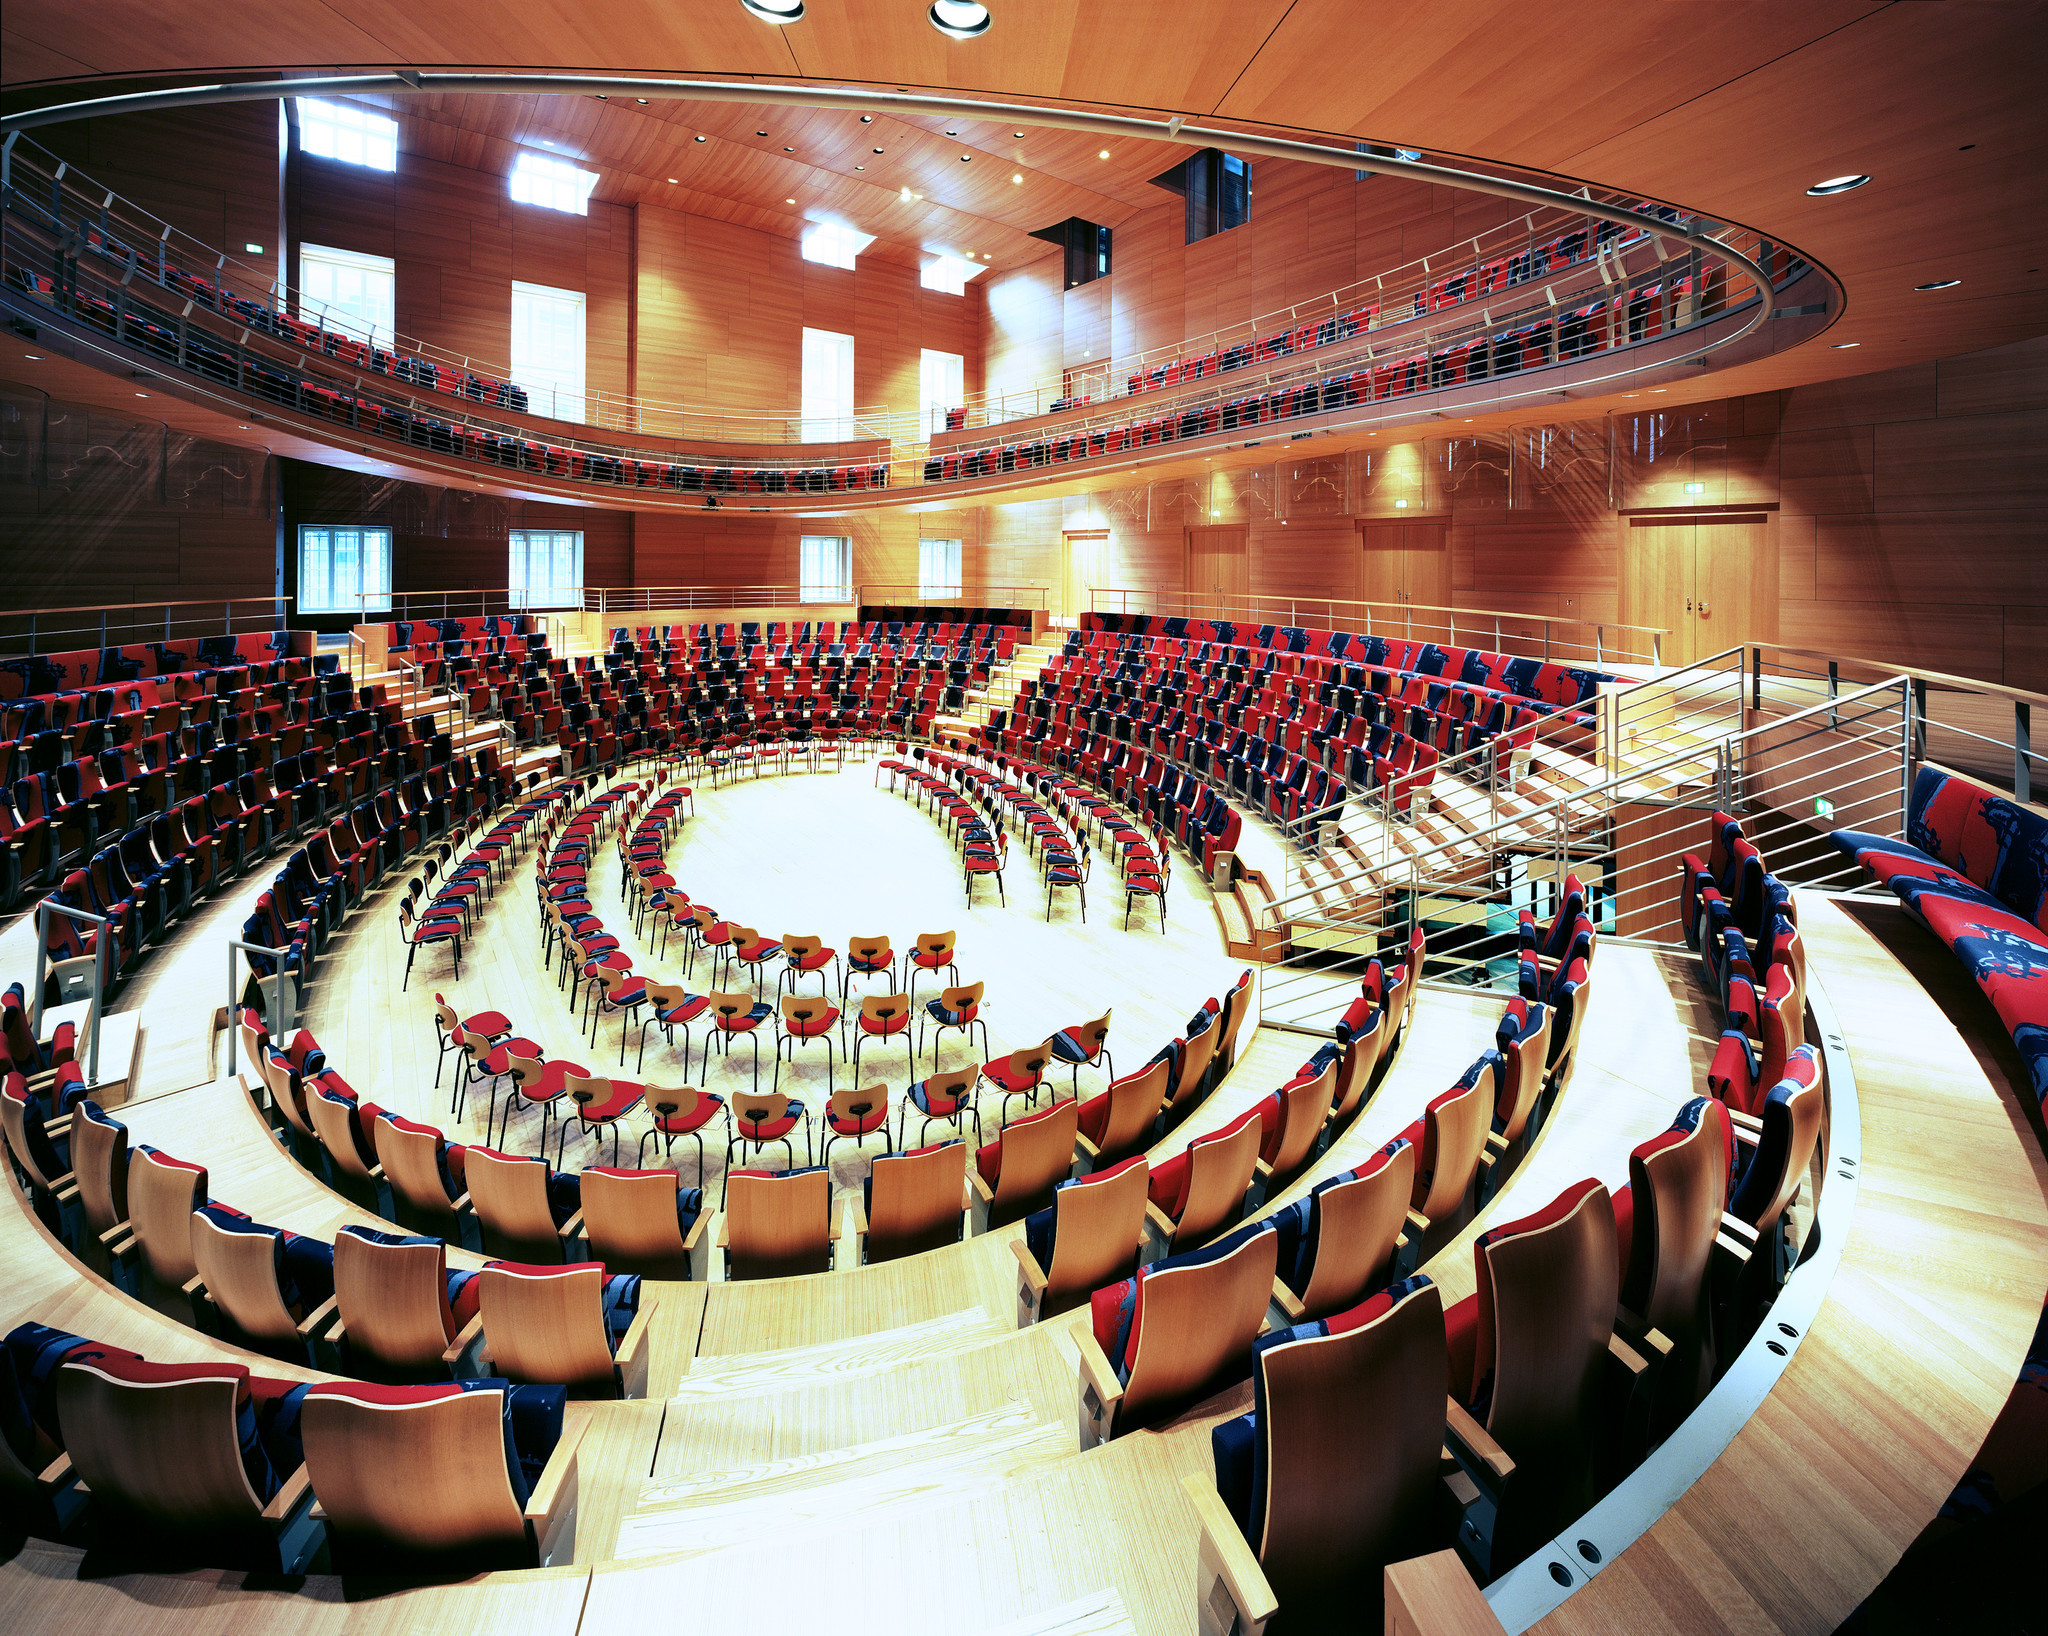 The hall is easily reconfigurable for concerts and rehearsals.